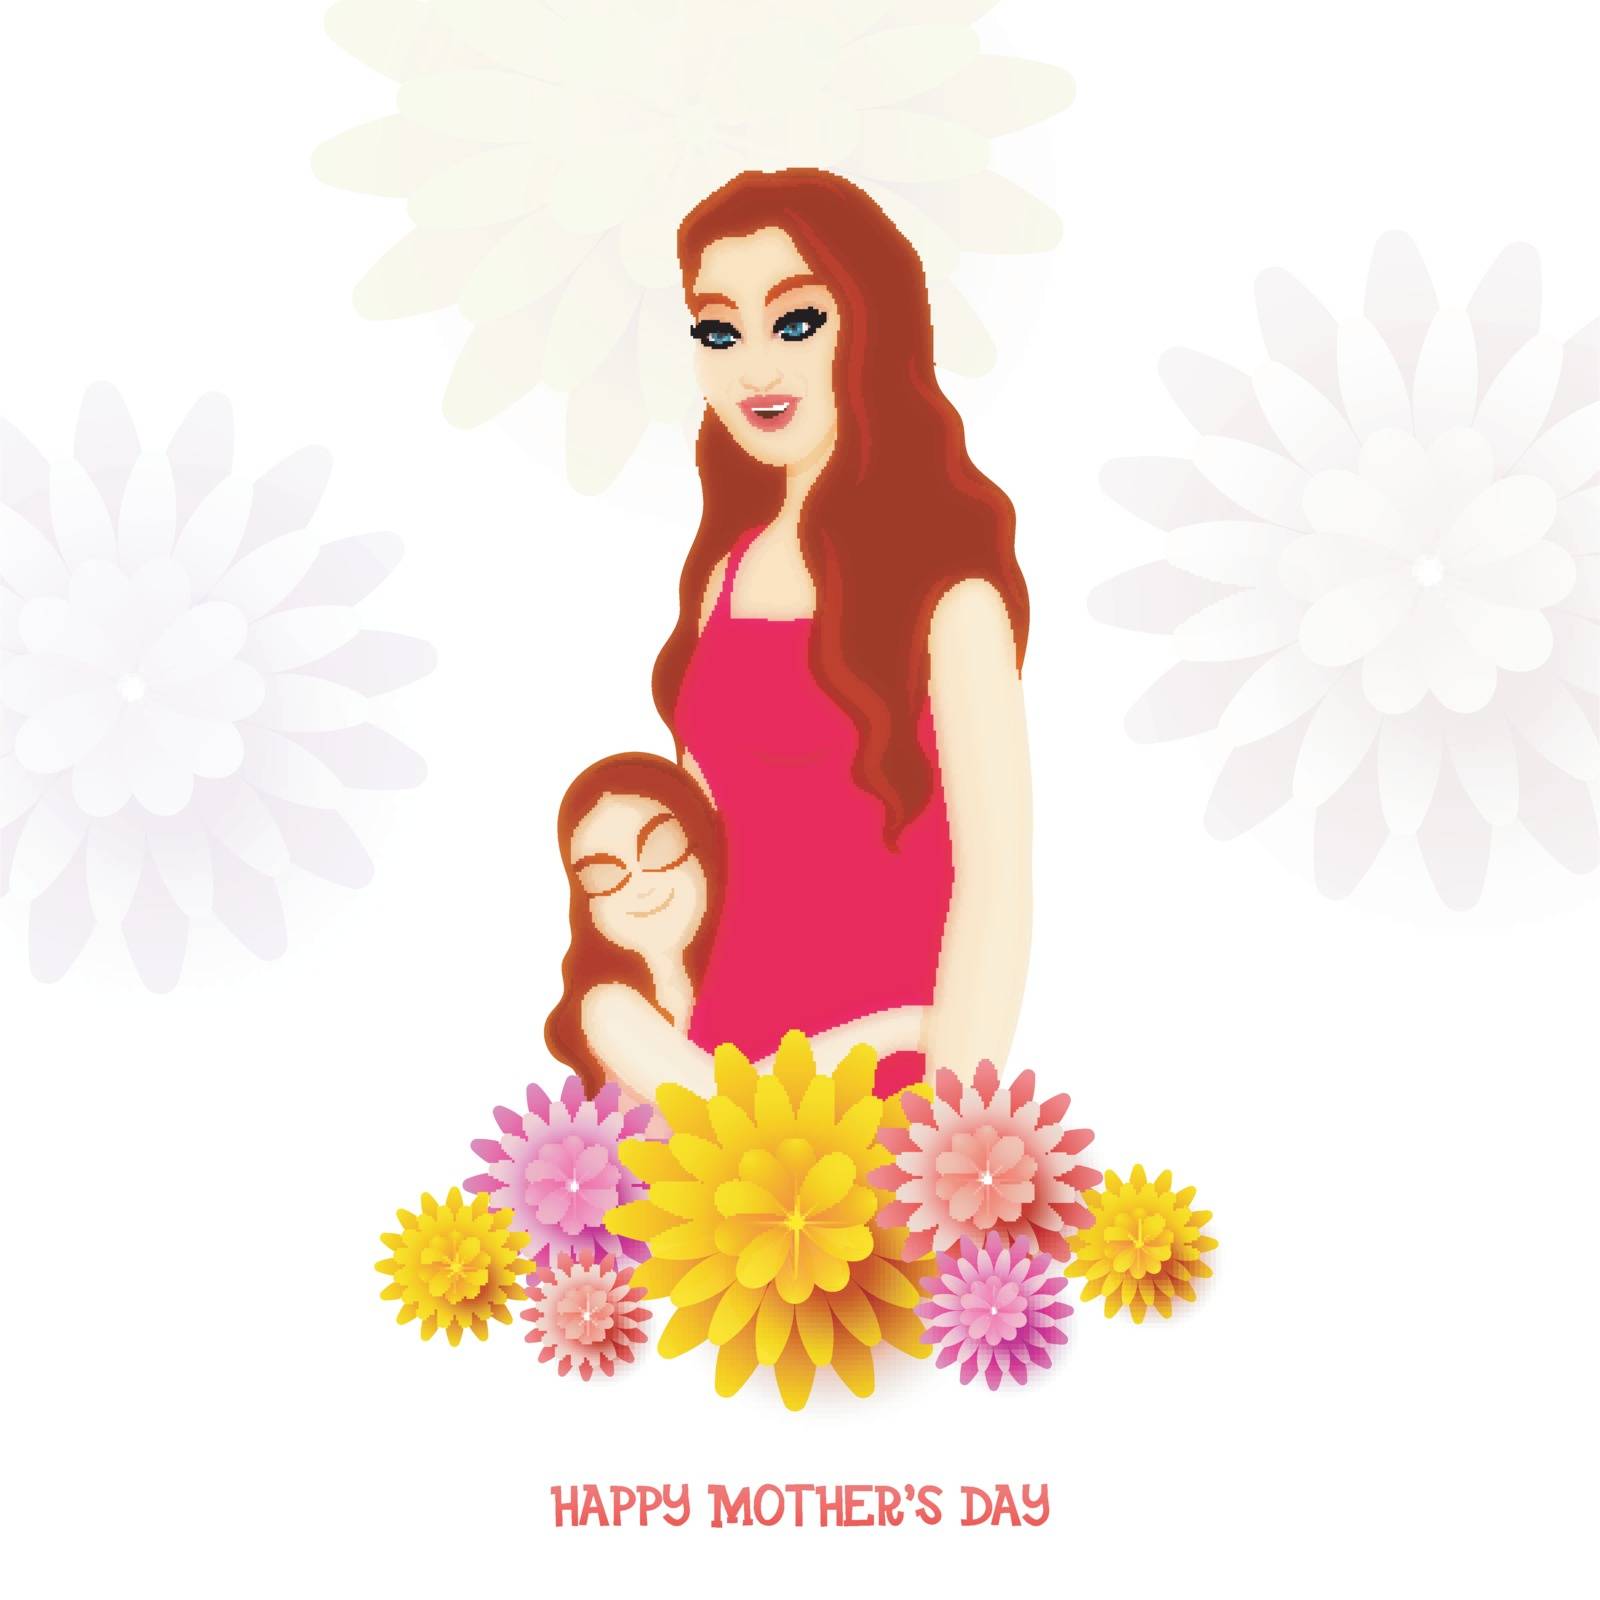 Cute daughter hugging her mother on flowers decorated background for Happy Mother's Day celebration.